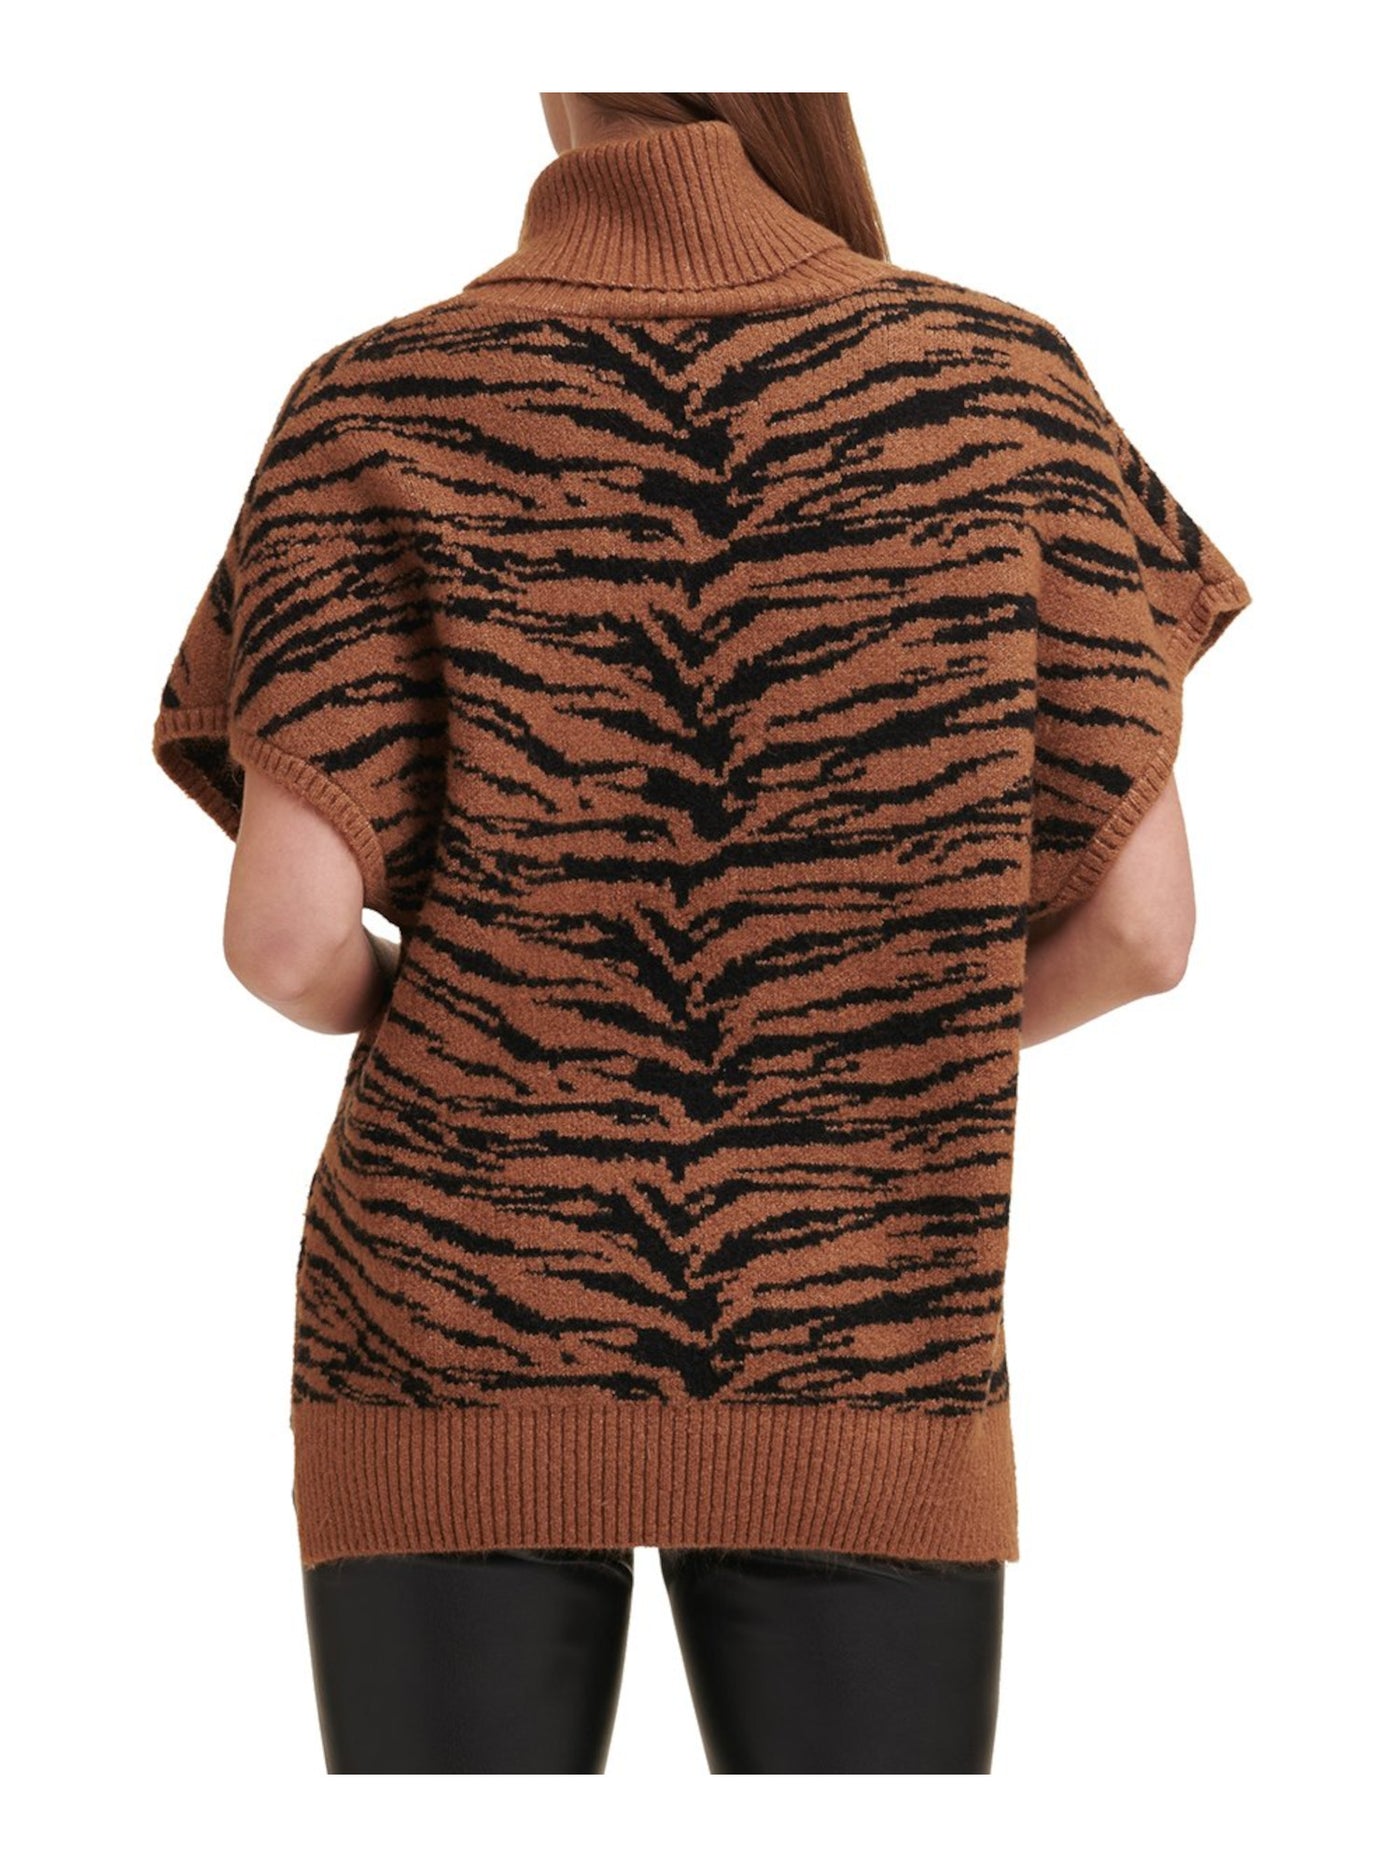 DKNY Womens Brown Knit Ribbed Slitted Animal Print Short Sleeve Turtle Neck Sweater XS\S